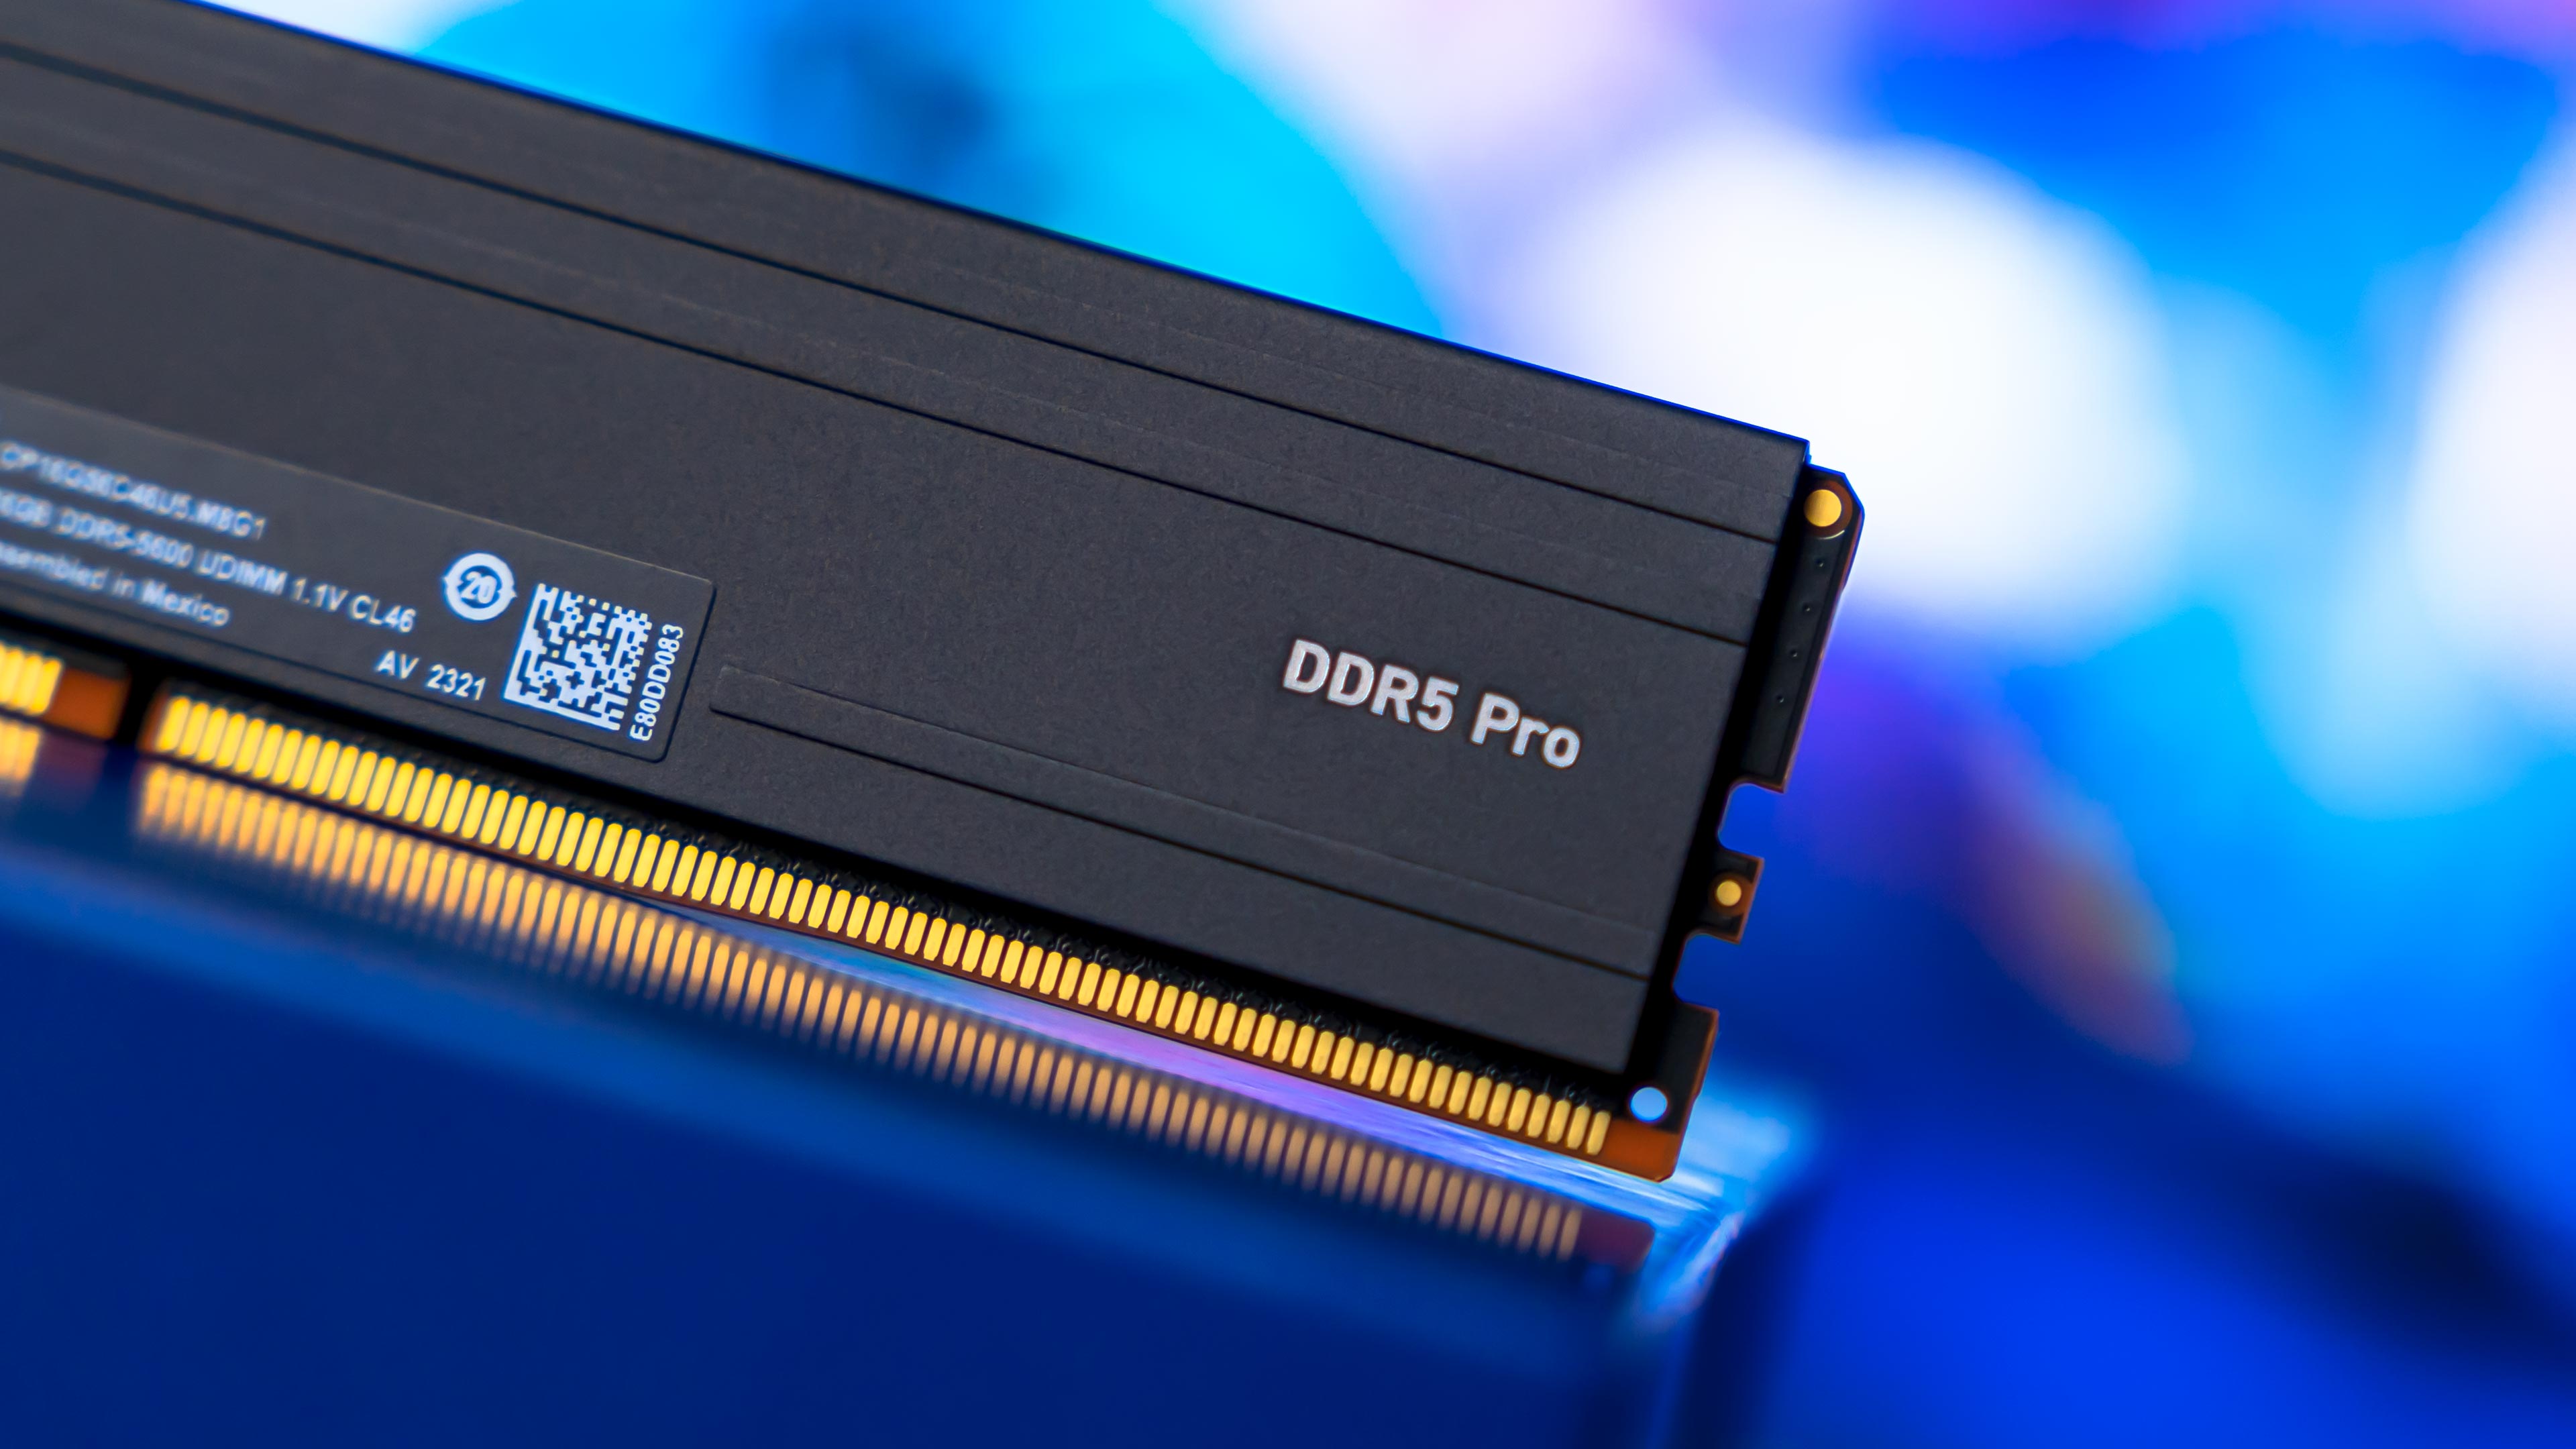 Crucial Pro DDR5 5600Mhz Memory (2)